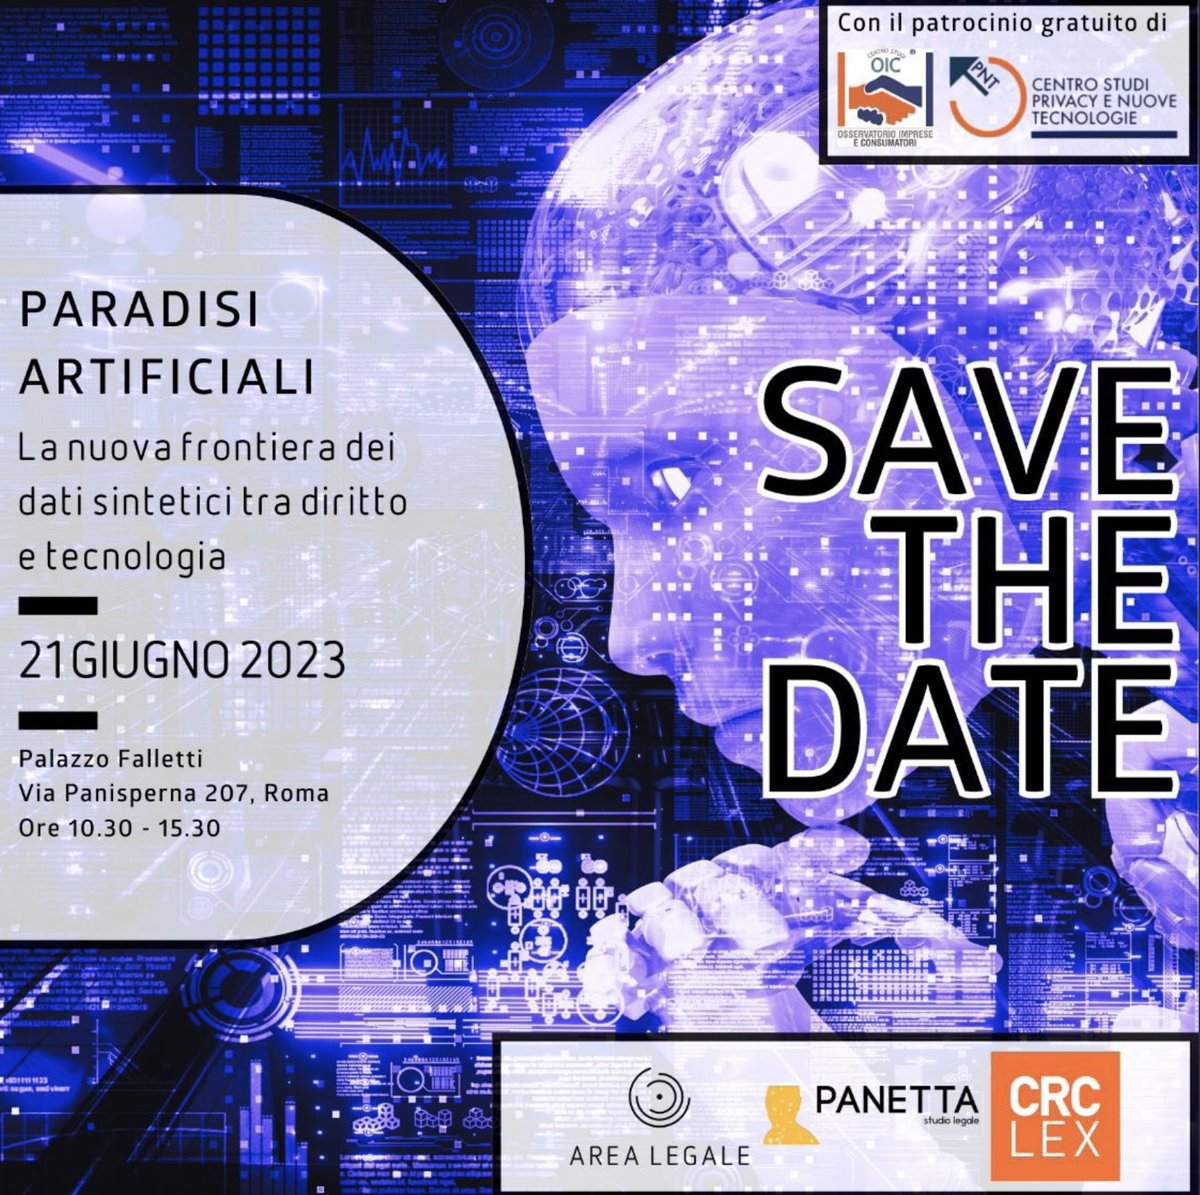 #artificial paradises, the new frontier of #syntheticdata between #law and #technology.

We attended this conference today in the magnificent setting of Palazzo Passerini Falletti, #Rome

#datisintetici #privacy #AI #security #arealegale 
@Lor_Cristofaro
@PanettaLawFirm